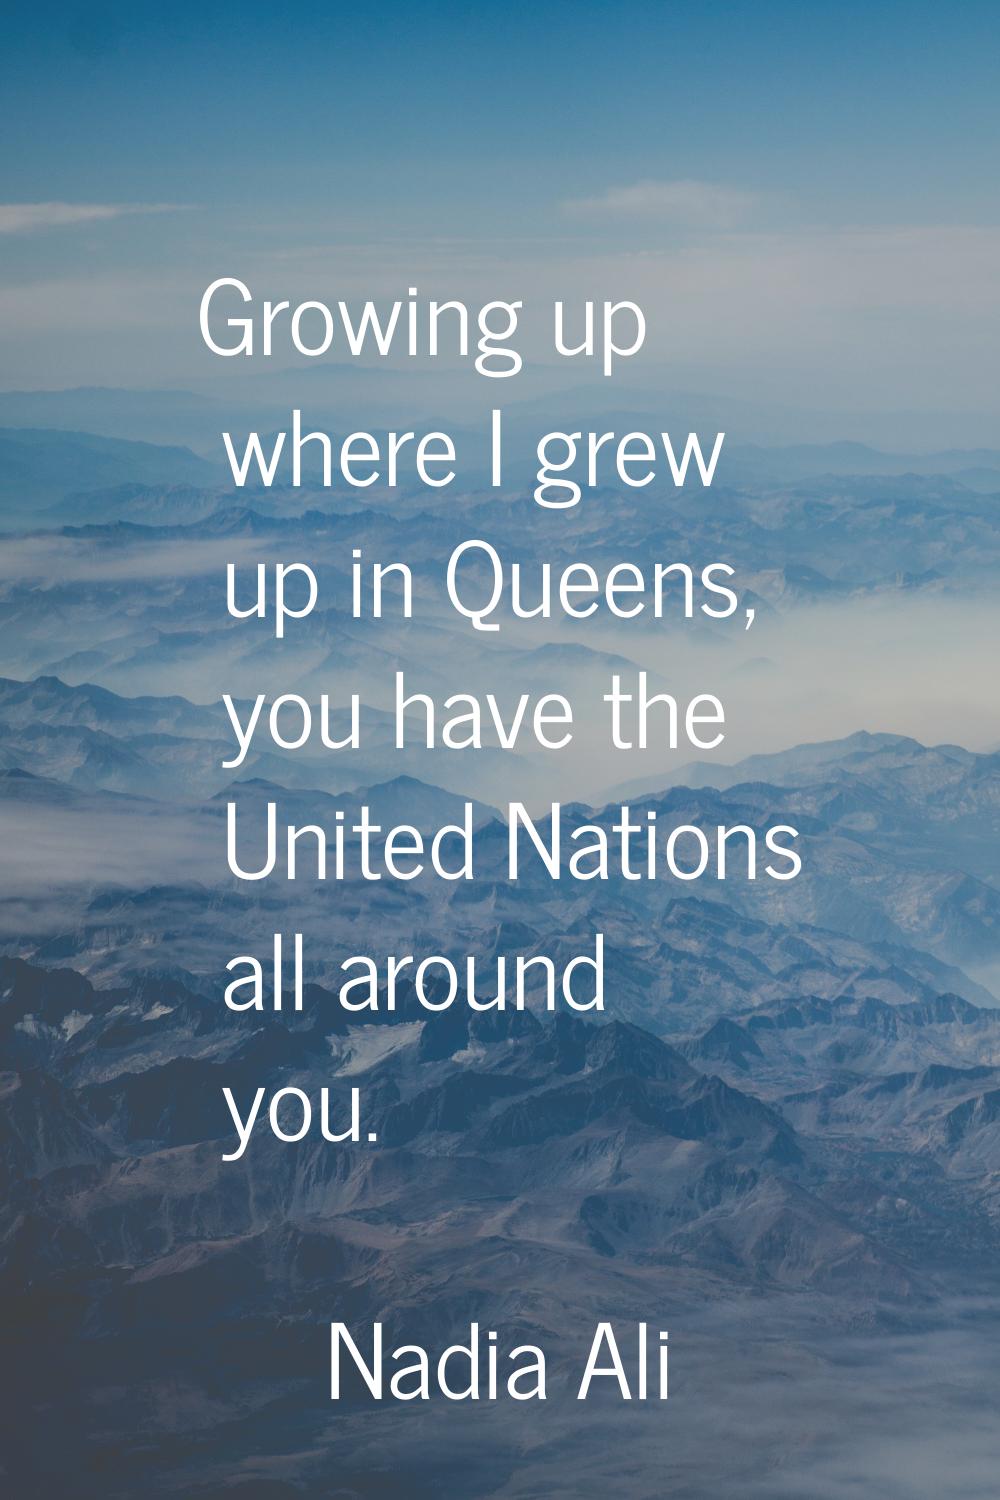 Growing up where I grew up in Queens, you have the United Nations all around you.